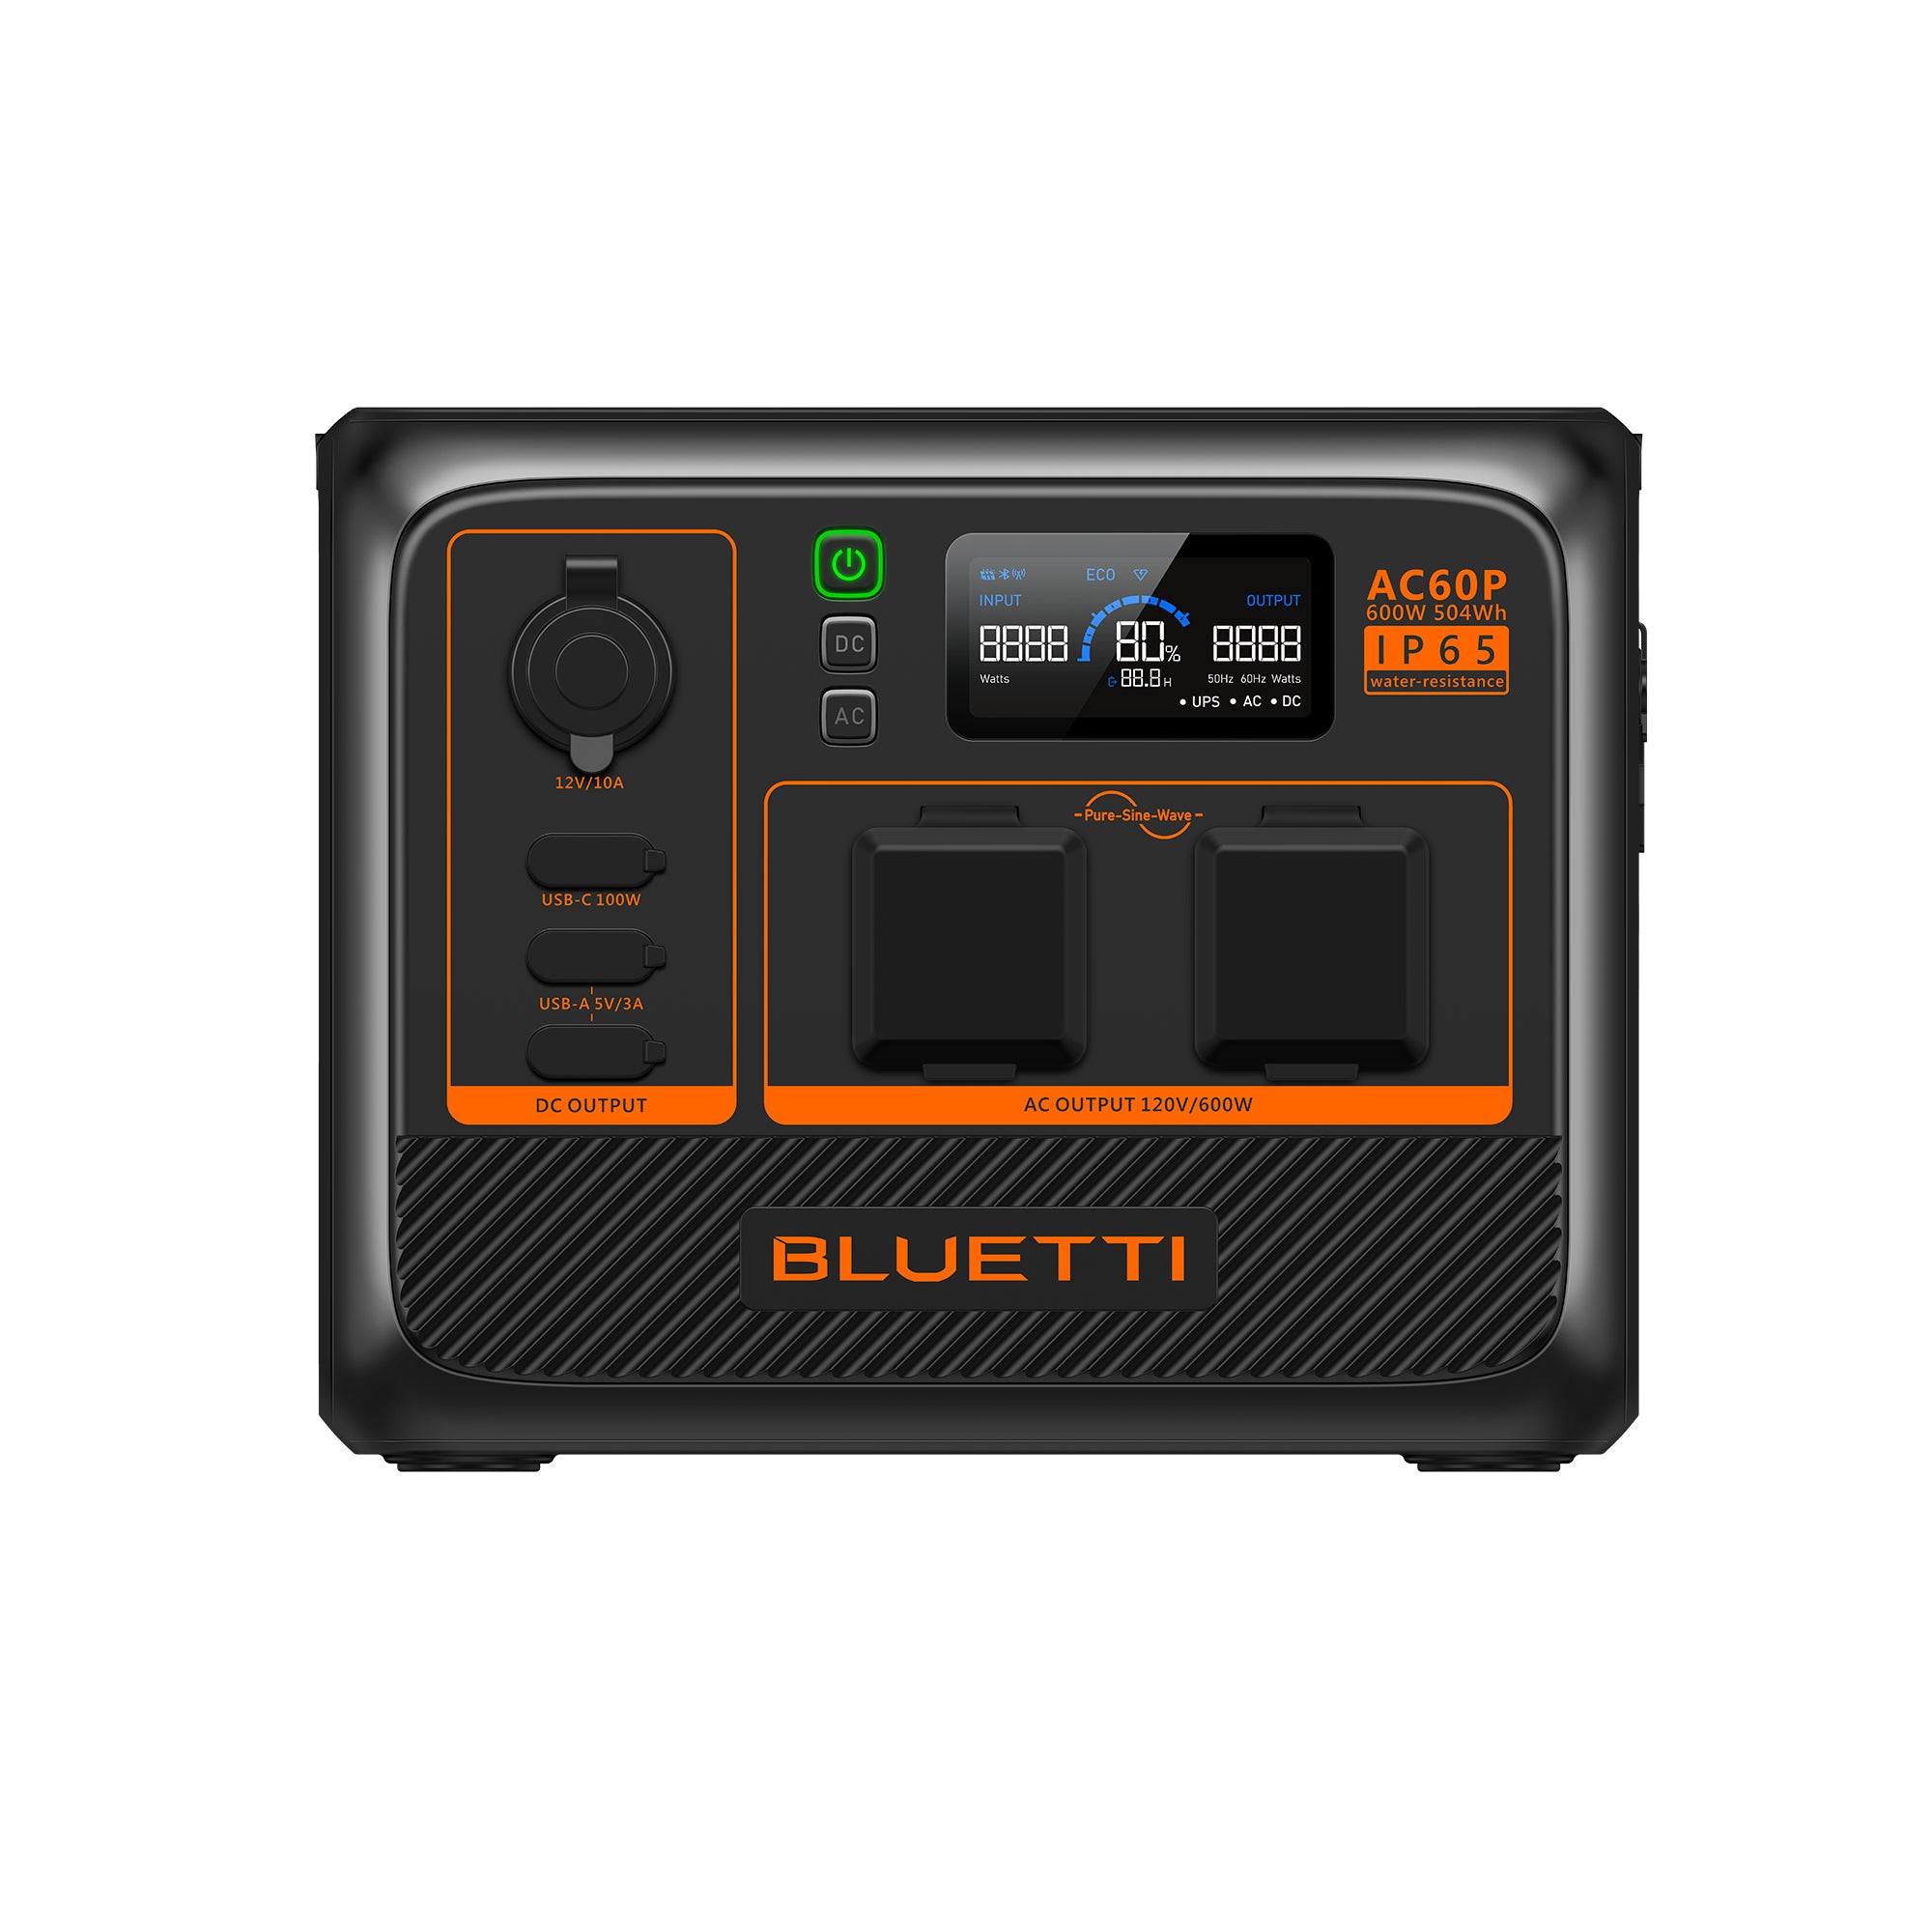 BLUETTI AC60 Portable Power Station For Camping/ 600W 403Wh, 4 Ways To Recharge (AC/Solar/Car/Lead-Acid Battery) AC60P / 600W,504Wh Power Station